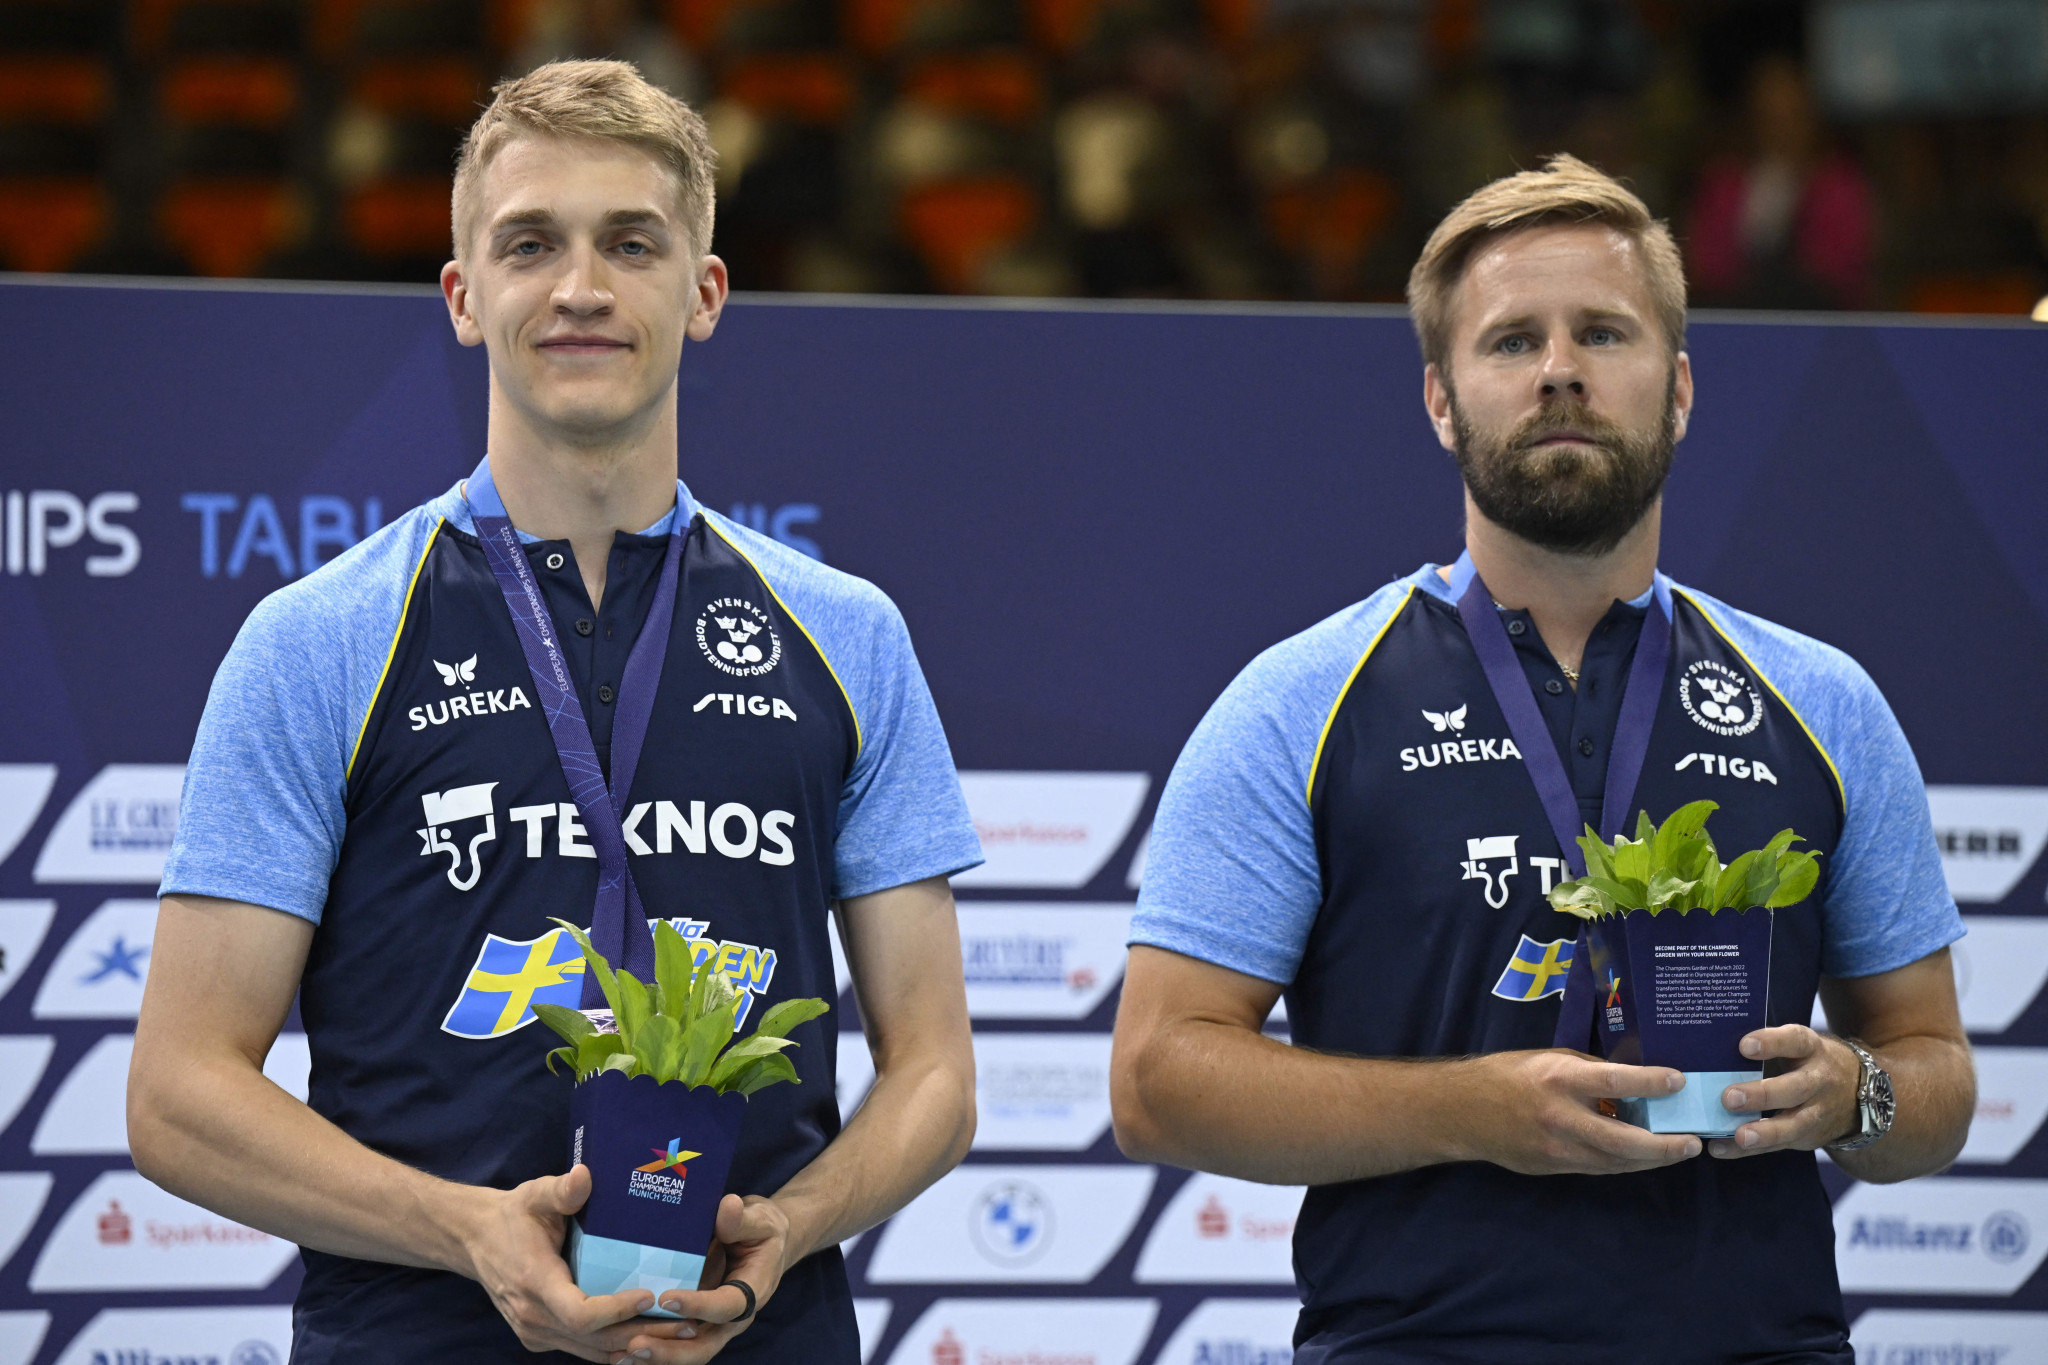 Sweden hit by COVID-19 cases before World Team Table Tennis Championships